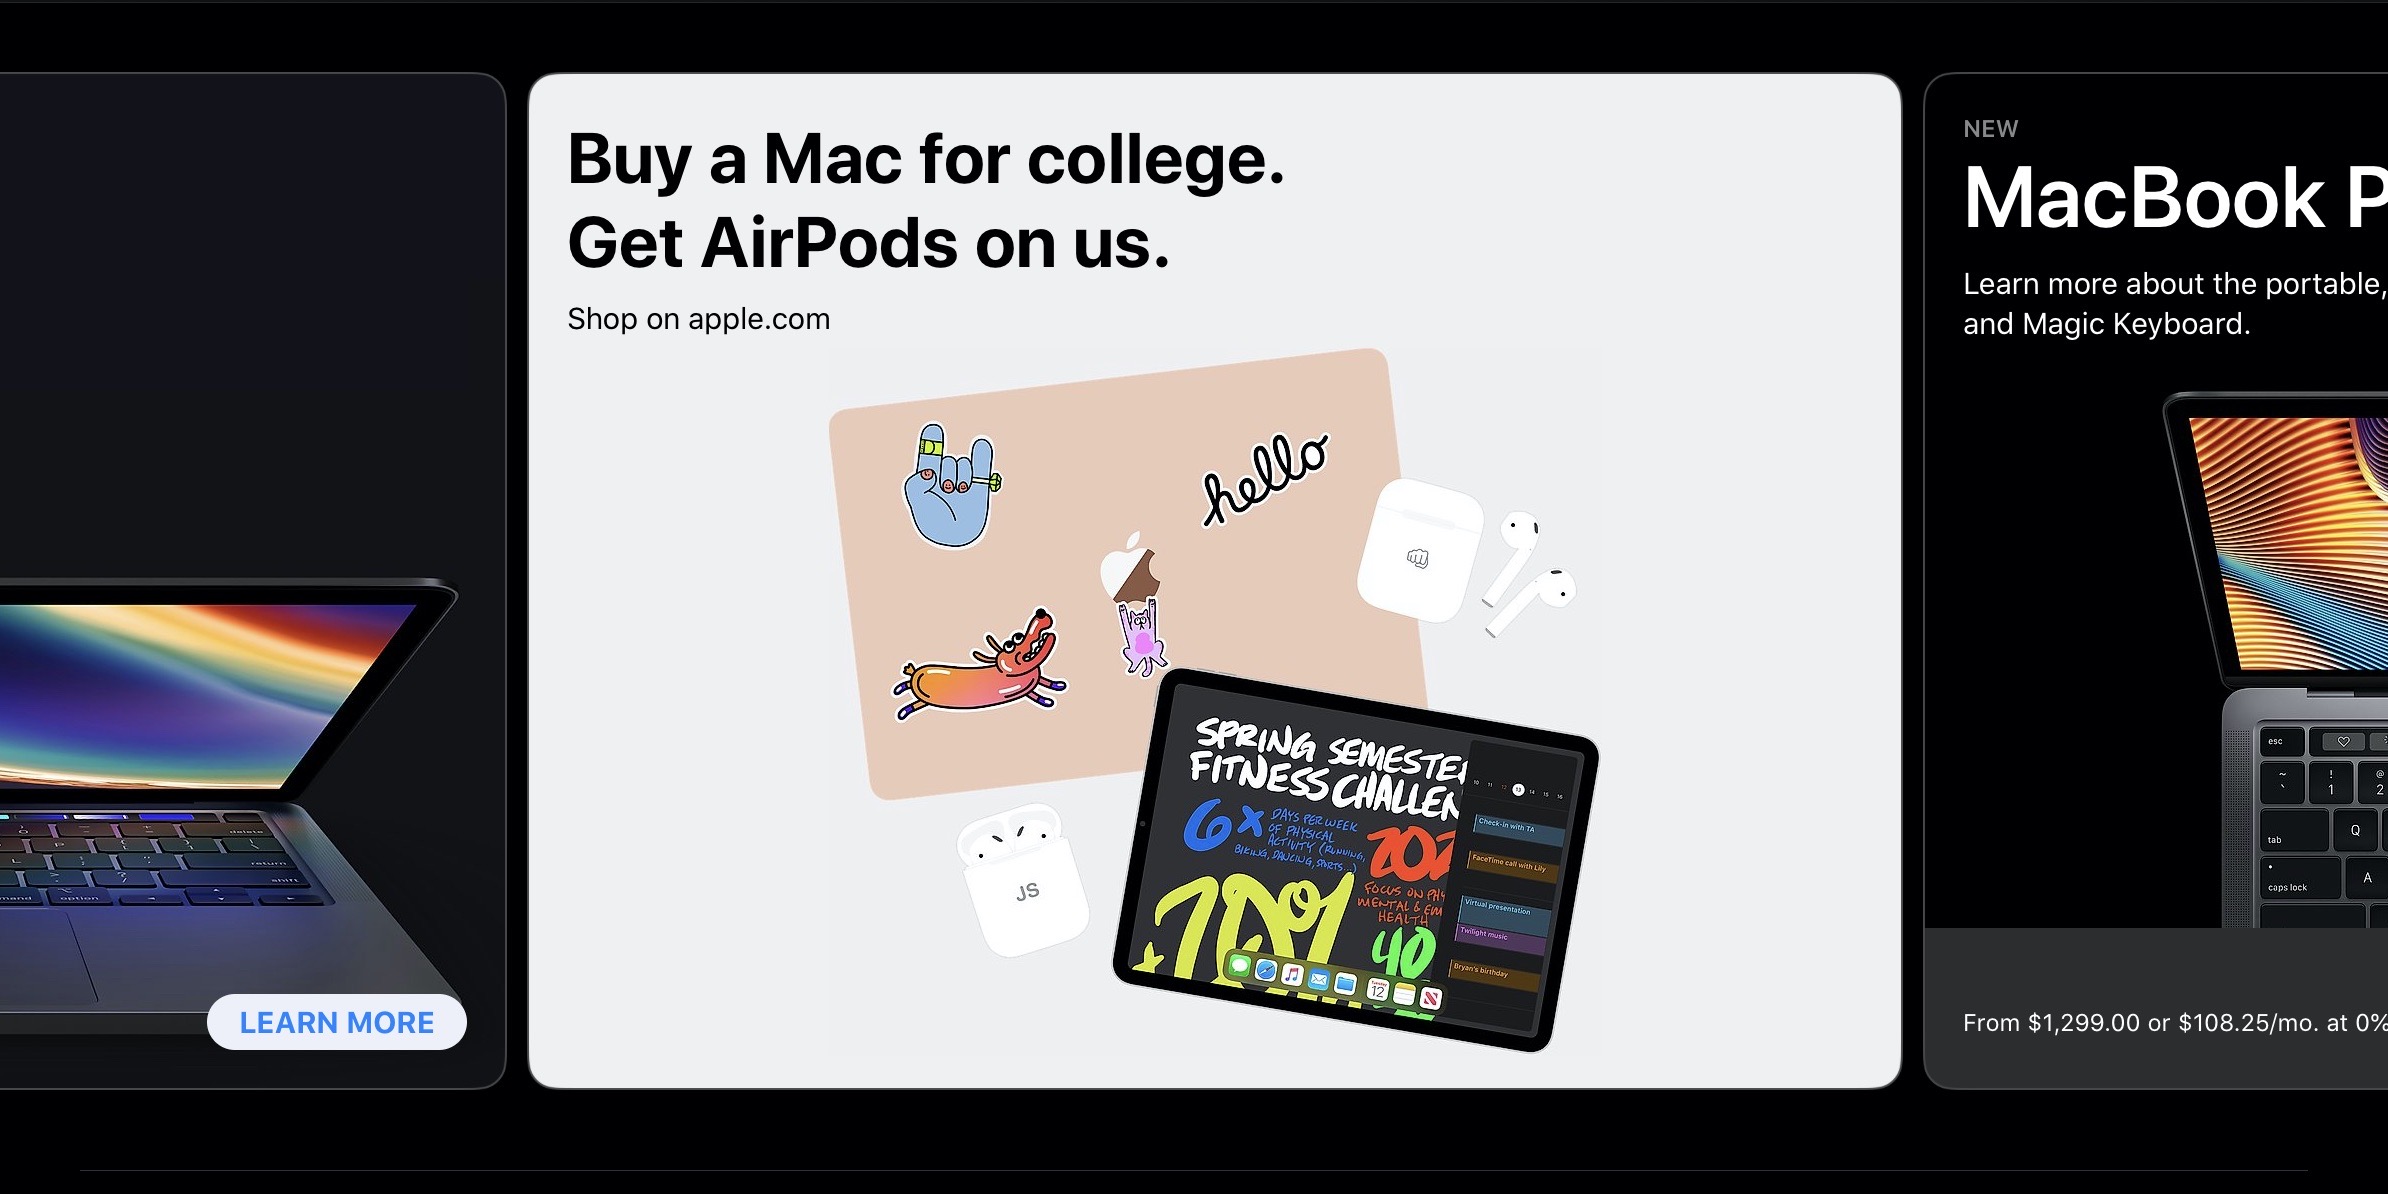 https://9to5mac.com/wp-content/uploads/sites/6/2020/06/apple-back-to-school-promotion-2020.jpeg?quality=82&strip=all